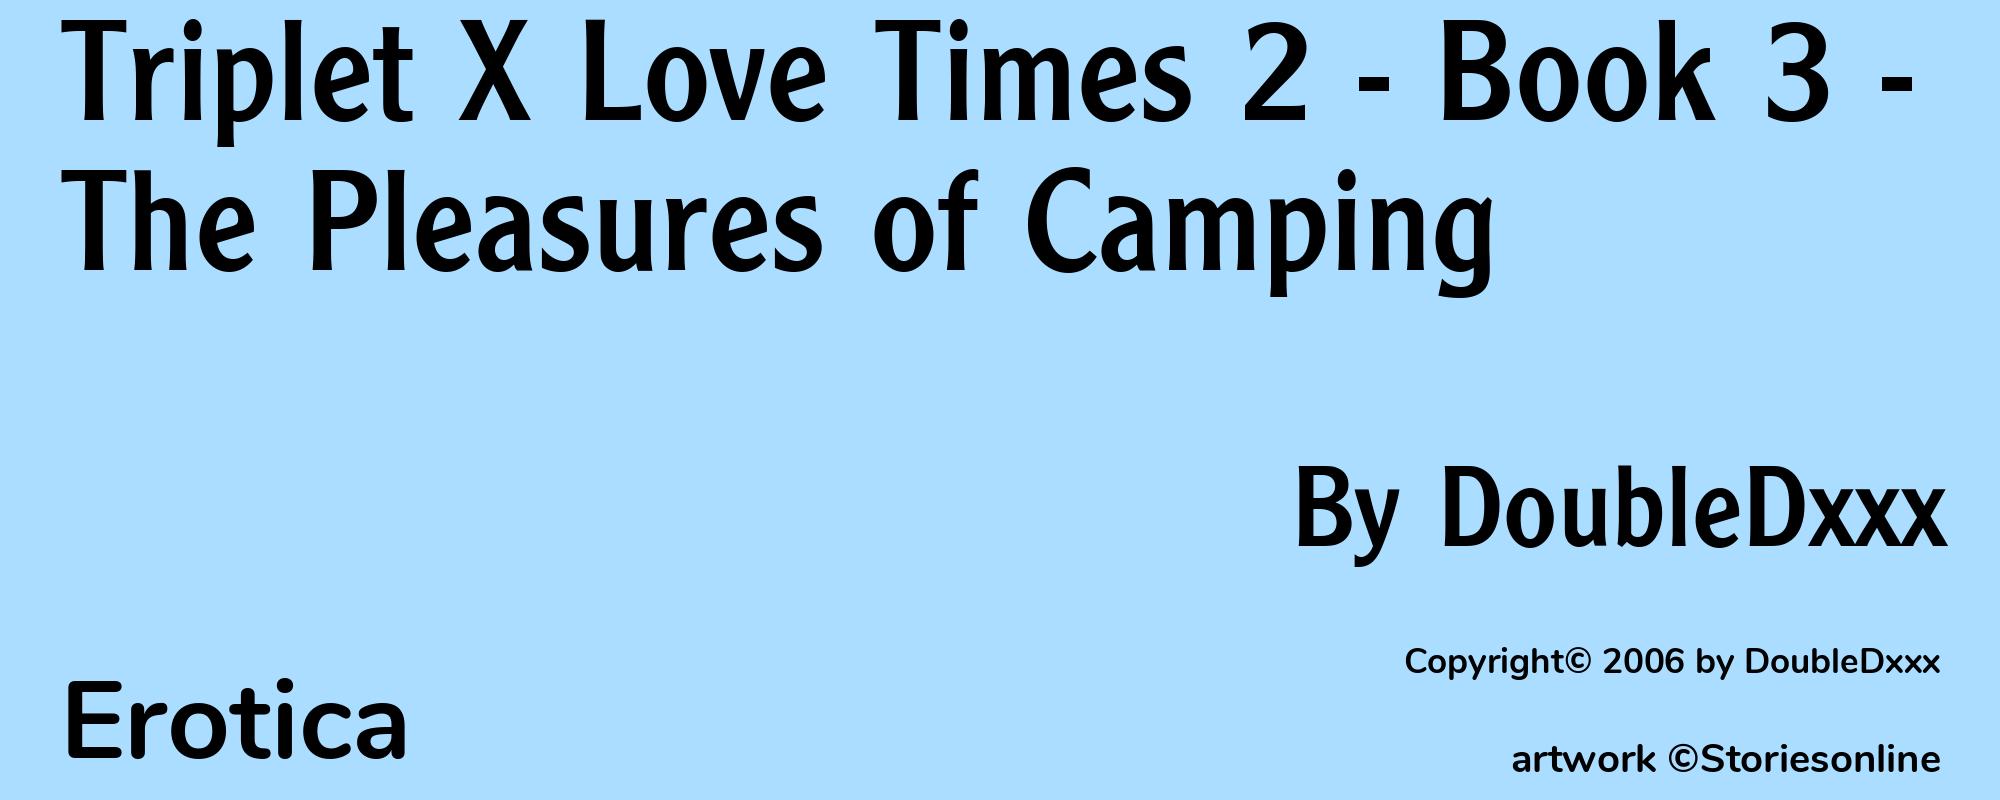 Triplet X Love Times 2 - Book 3 - The Pleasures of Camping - Cover